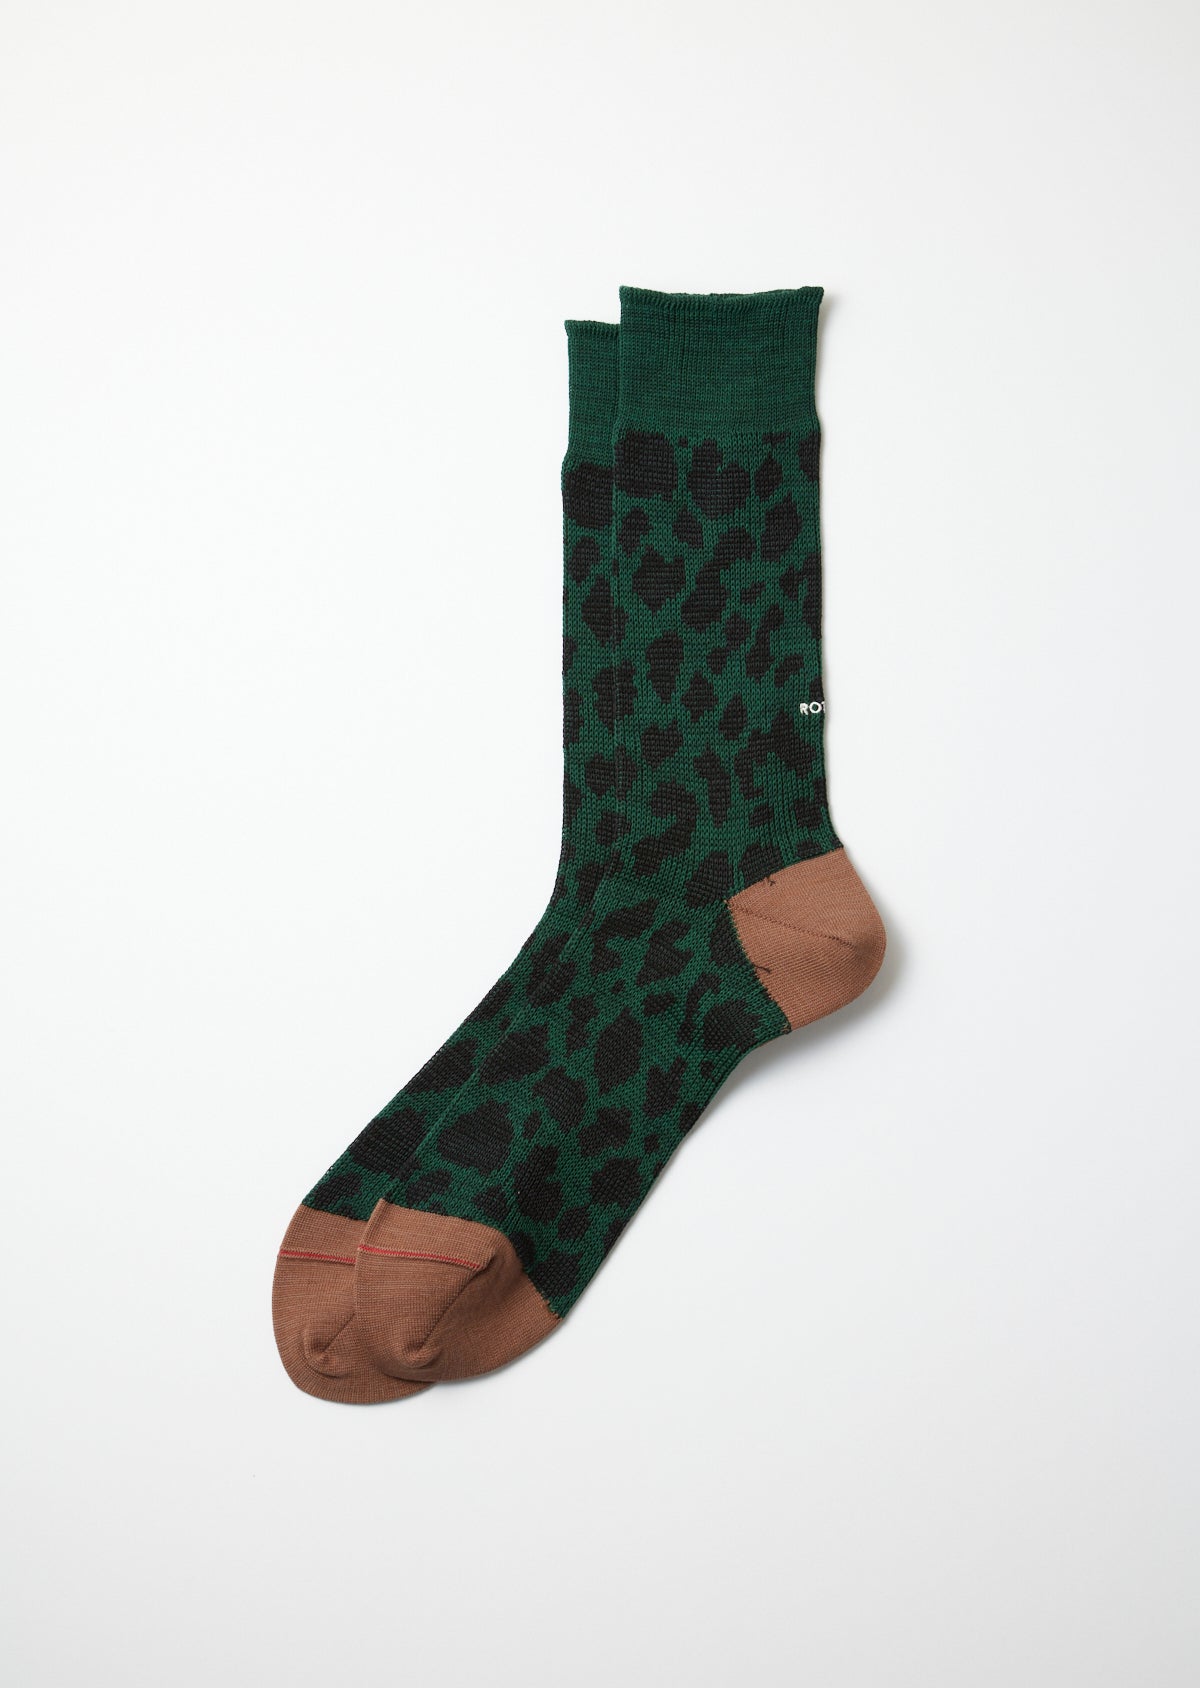 Rototo Organic Cotton & Recycle Polyester Socks "LEOPARD" (Dark Green/Brown)